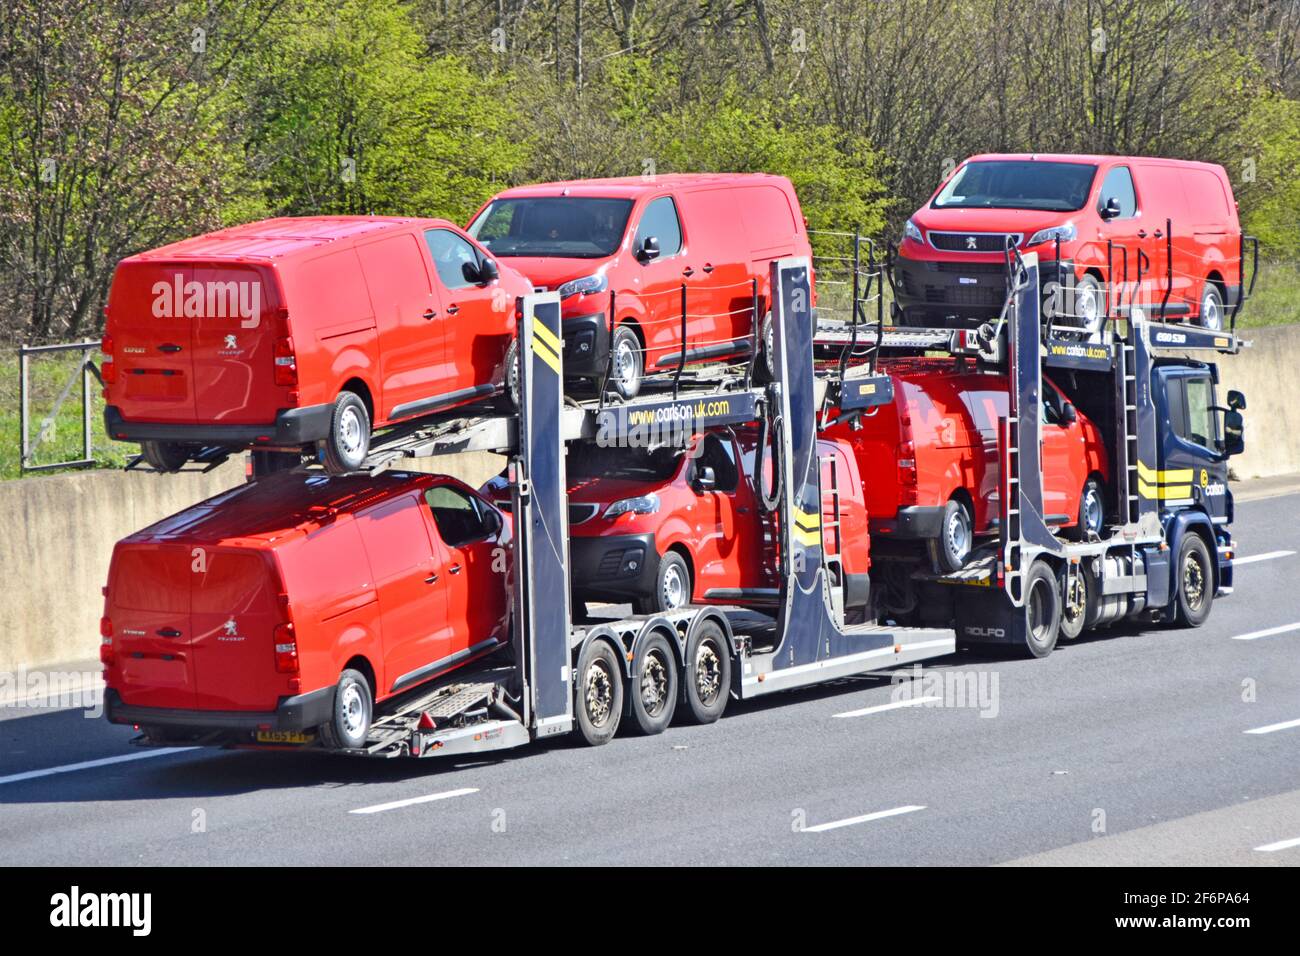 Lorry truck car distribution transporter trailer to transport & deliver six new red Peugeot Expert brand of vans driving on M25 motorway England UK Stock Photo